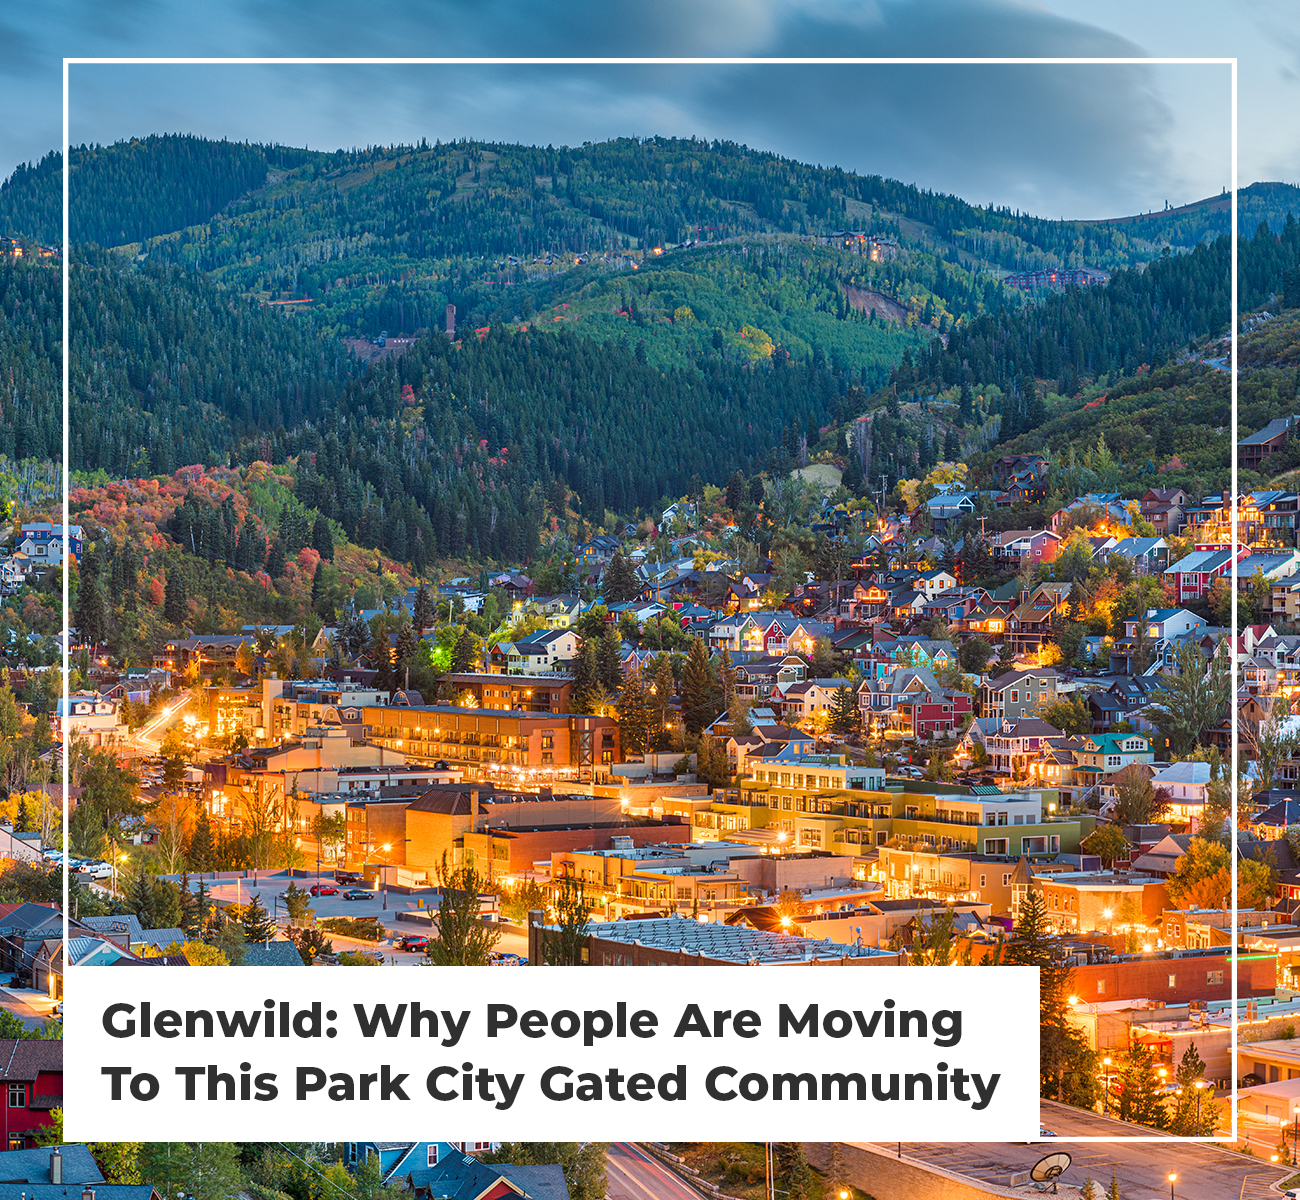 Glenwild: Why People Are Moving To This Park City Gated Community